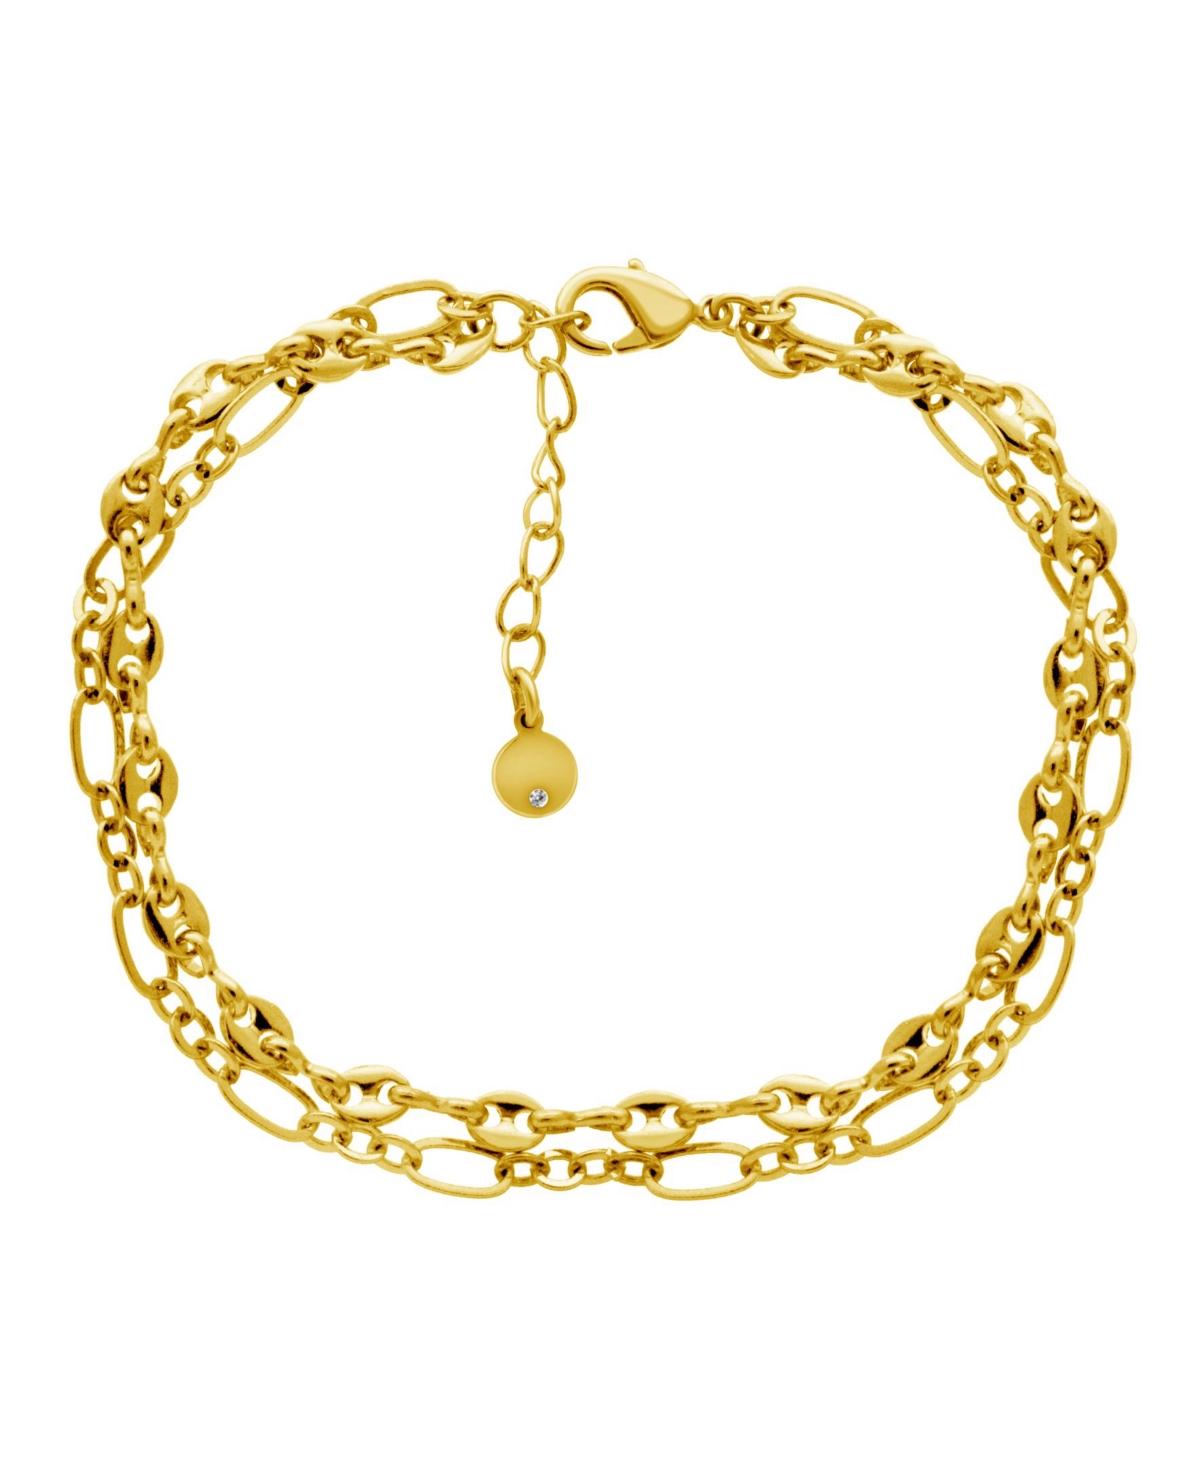 Gold or Silver Plated Marine Double Chain Bracelet - Gold-Plated